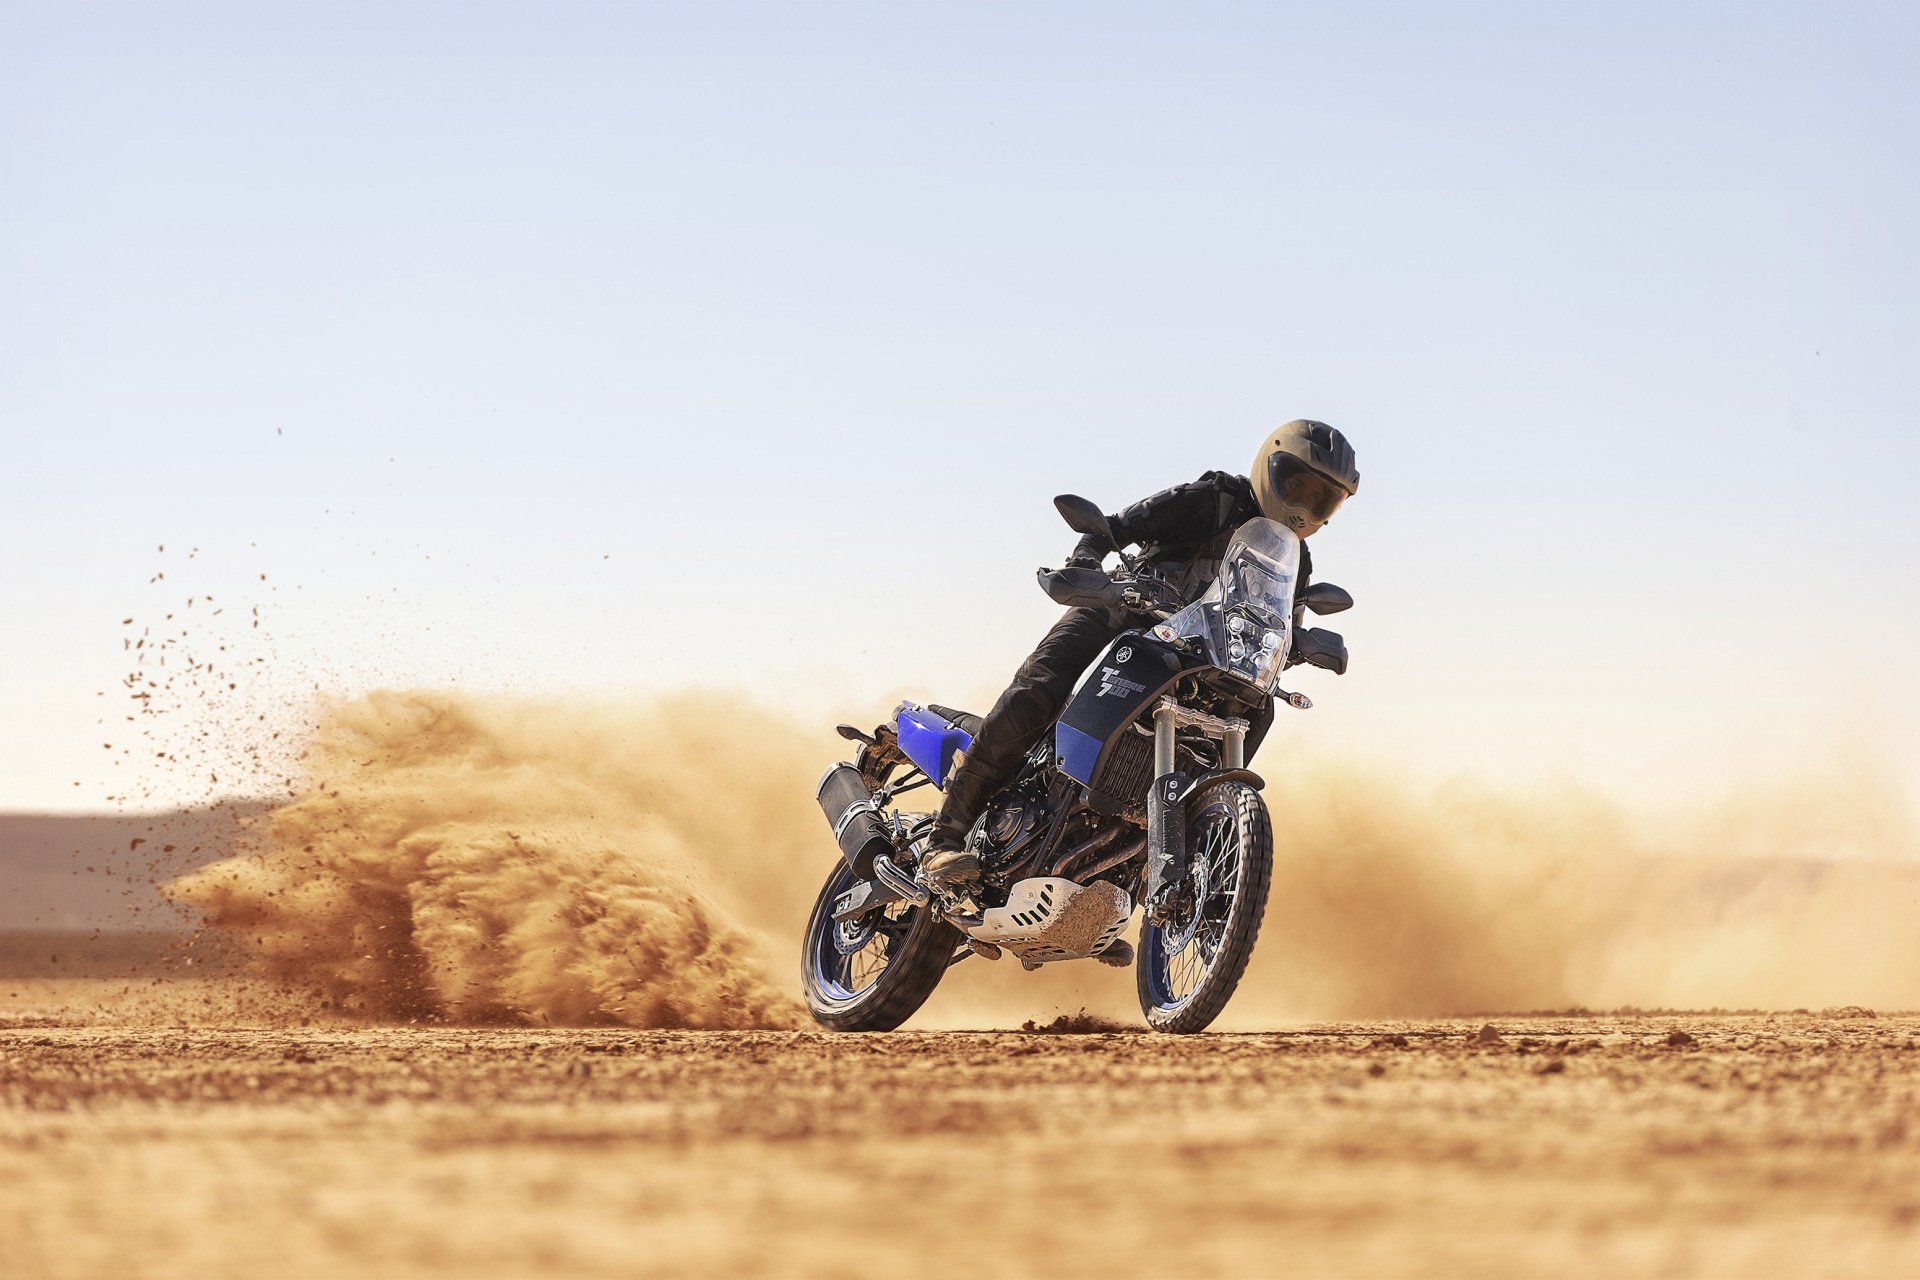 Man Riding A Motorcycle In Sand — Motorcycle Dealer in Berrimah, NT